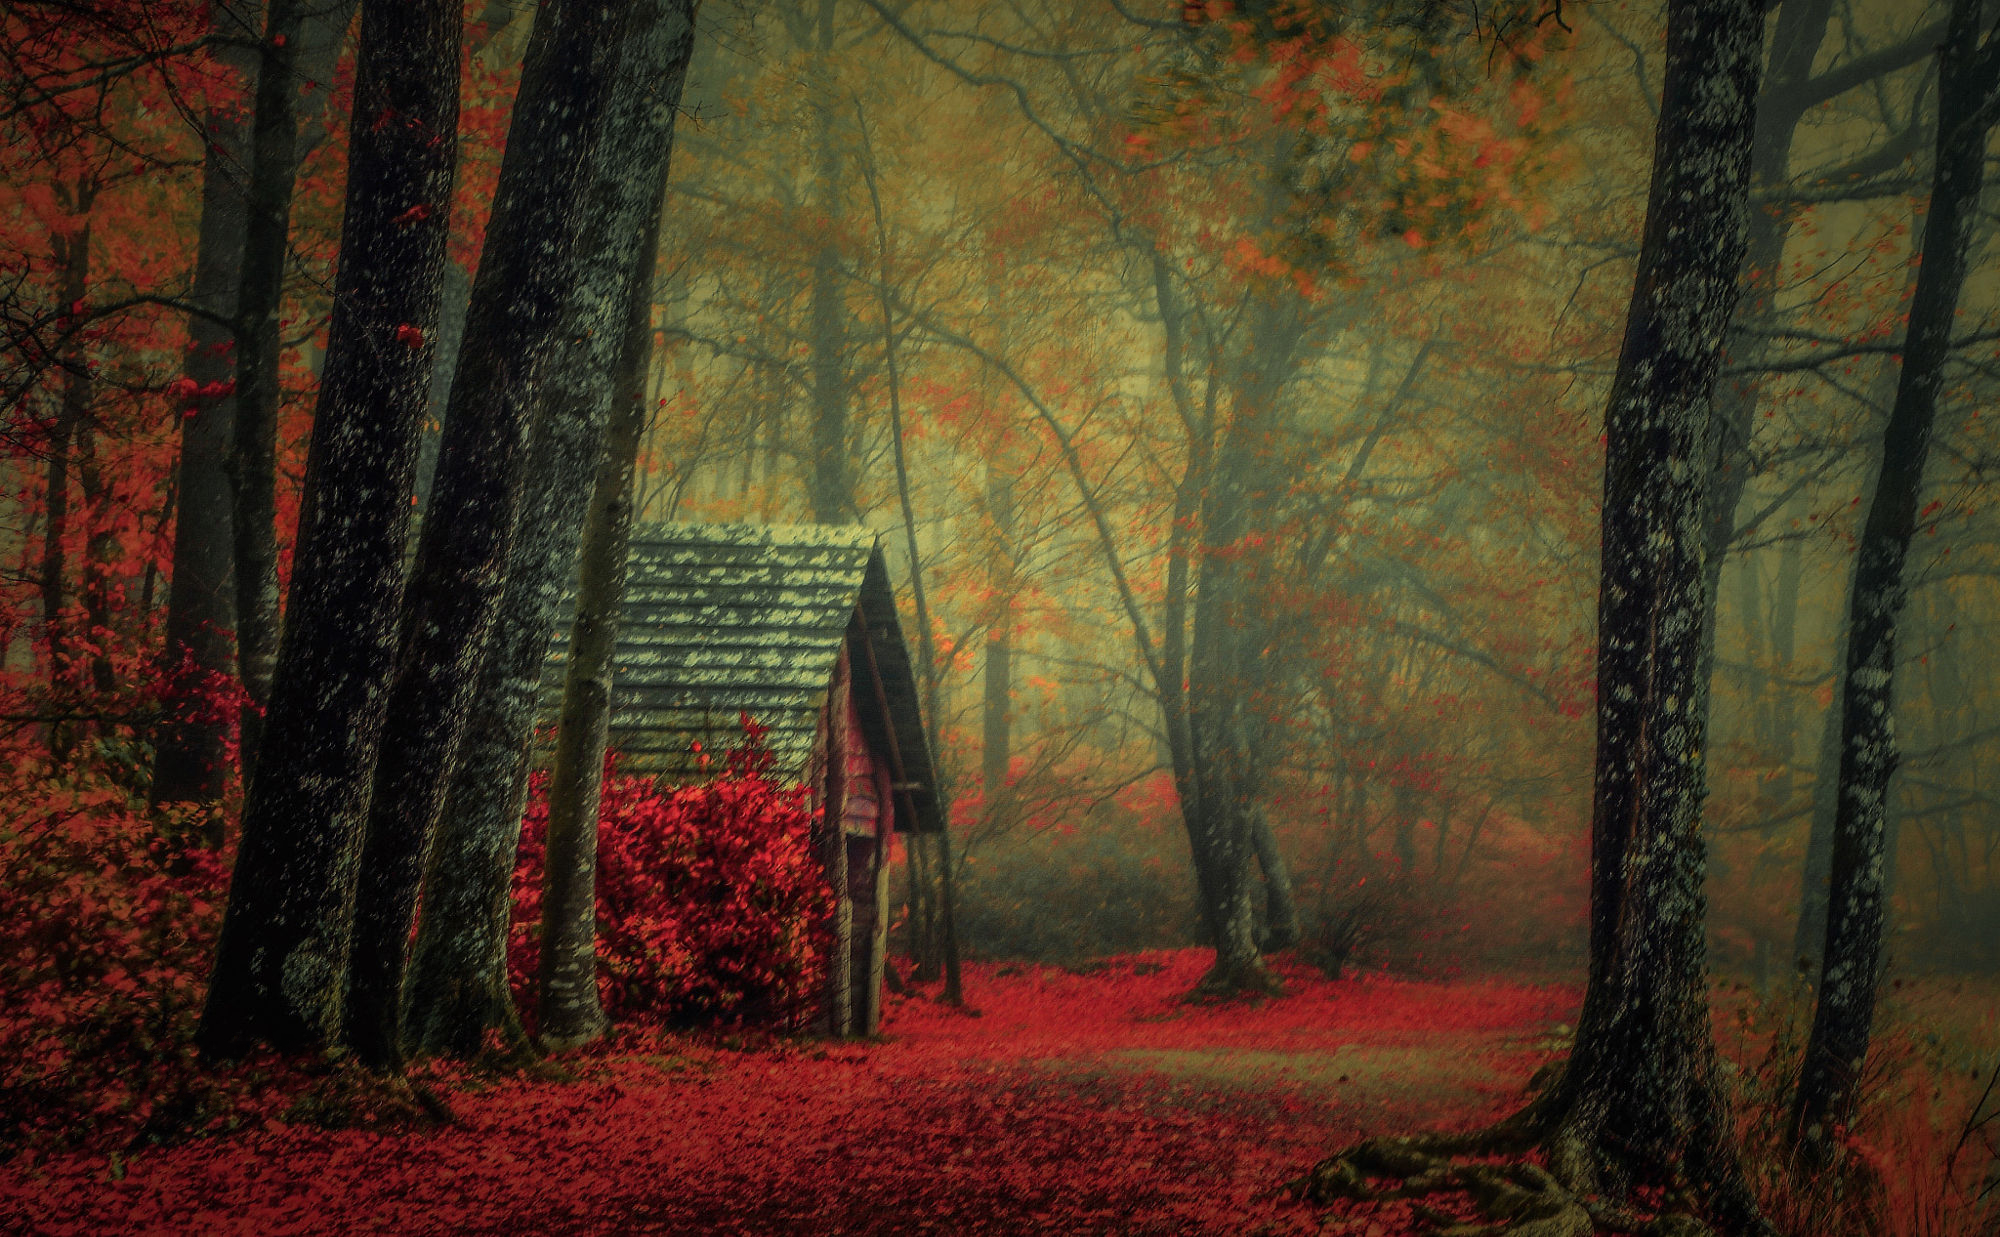 Download Fog Red Tree Fall Forest Man Made Cabin HD Wallpaper By Patrice THOMAS